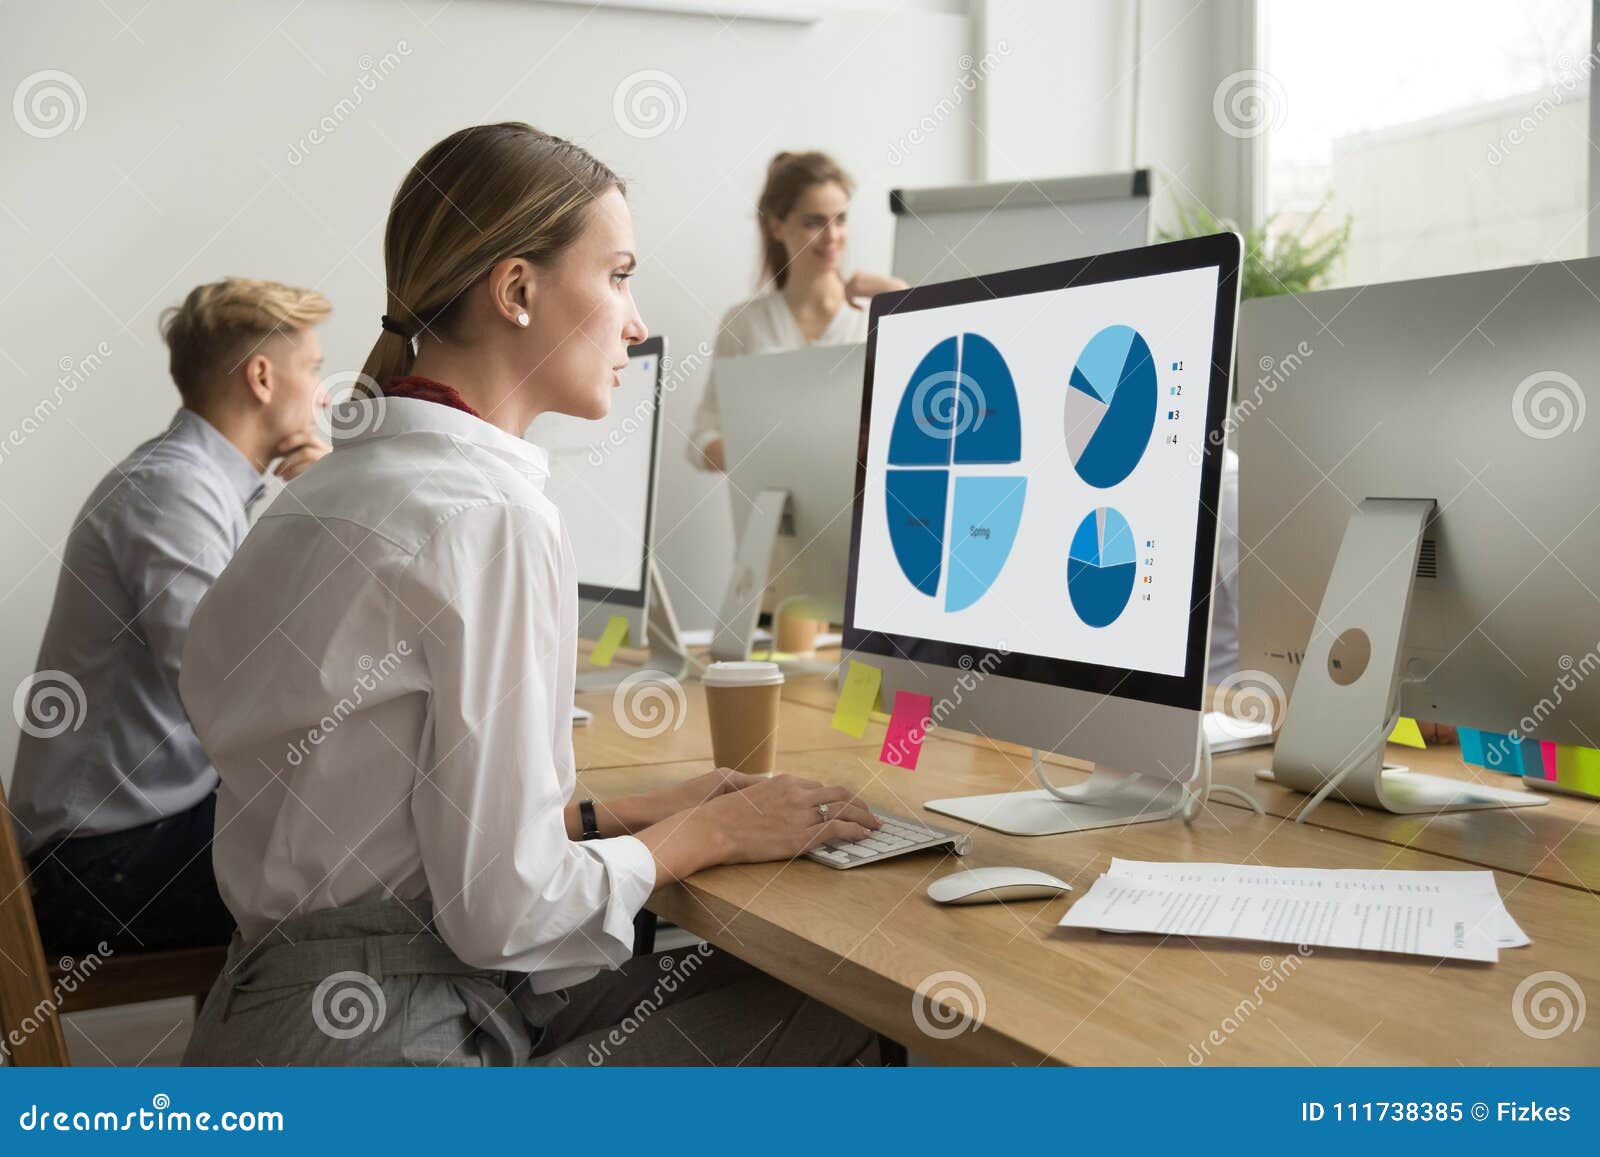 focused woman working with statistics charts using computer in o